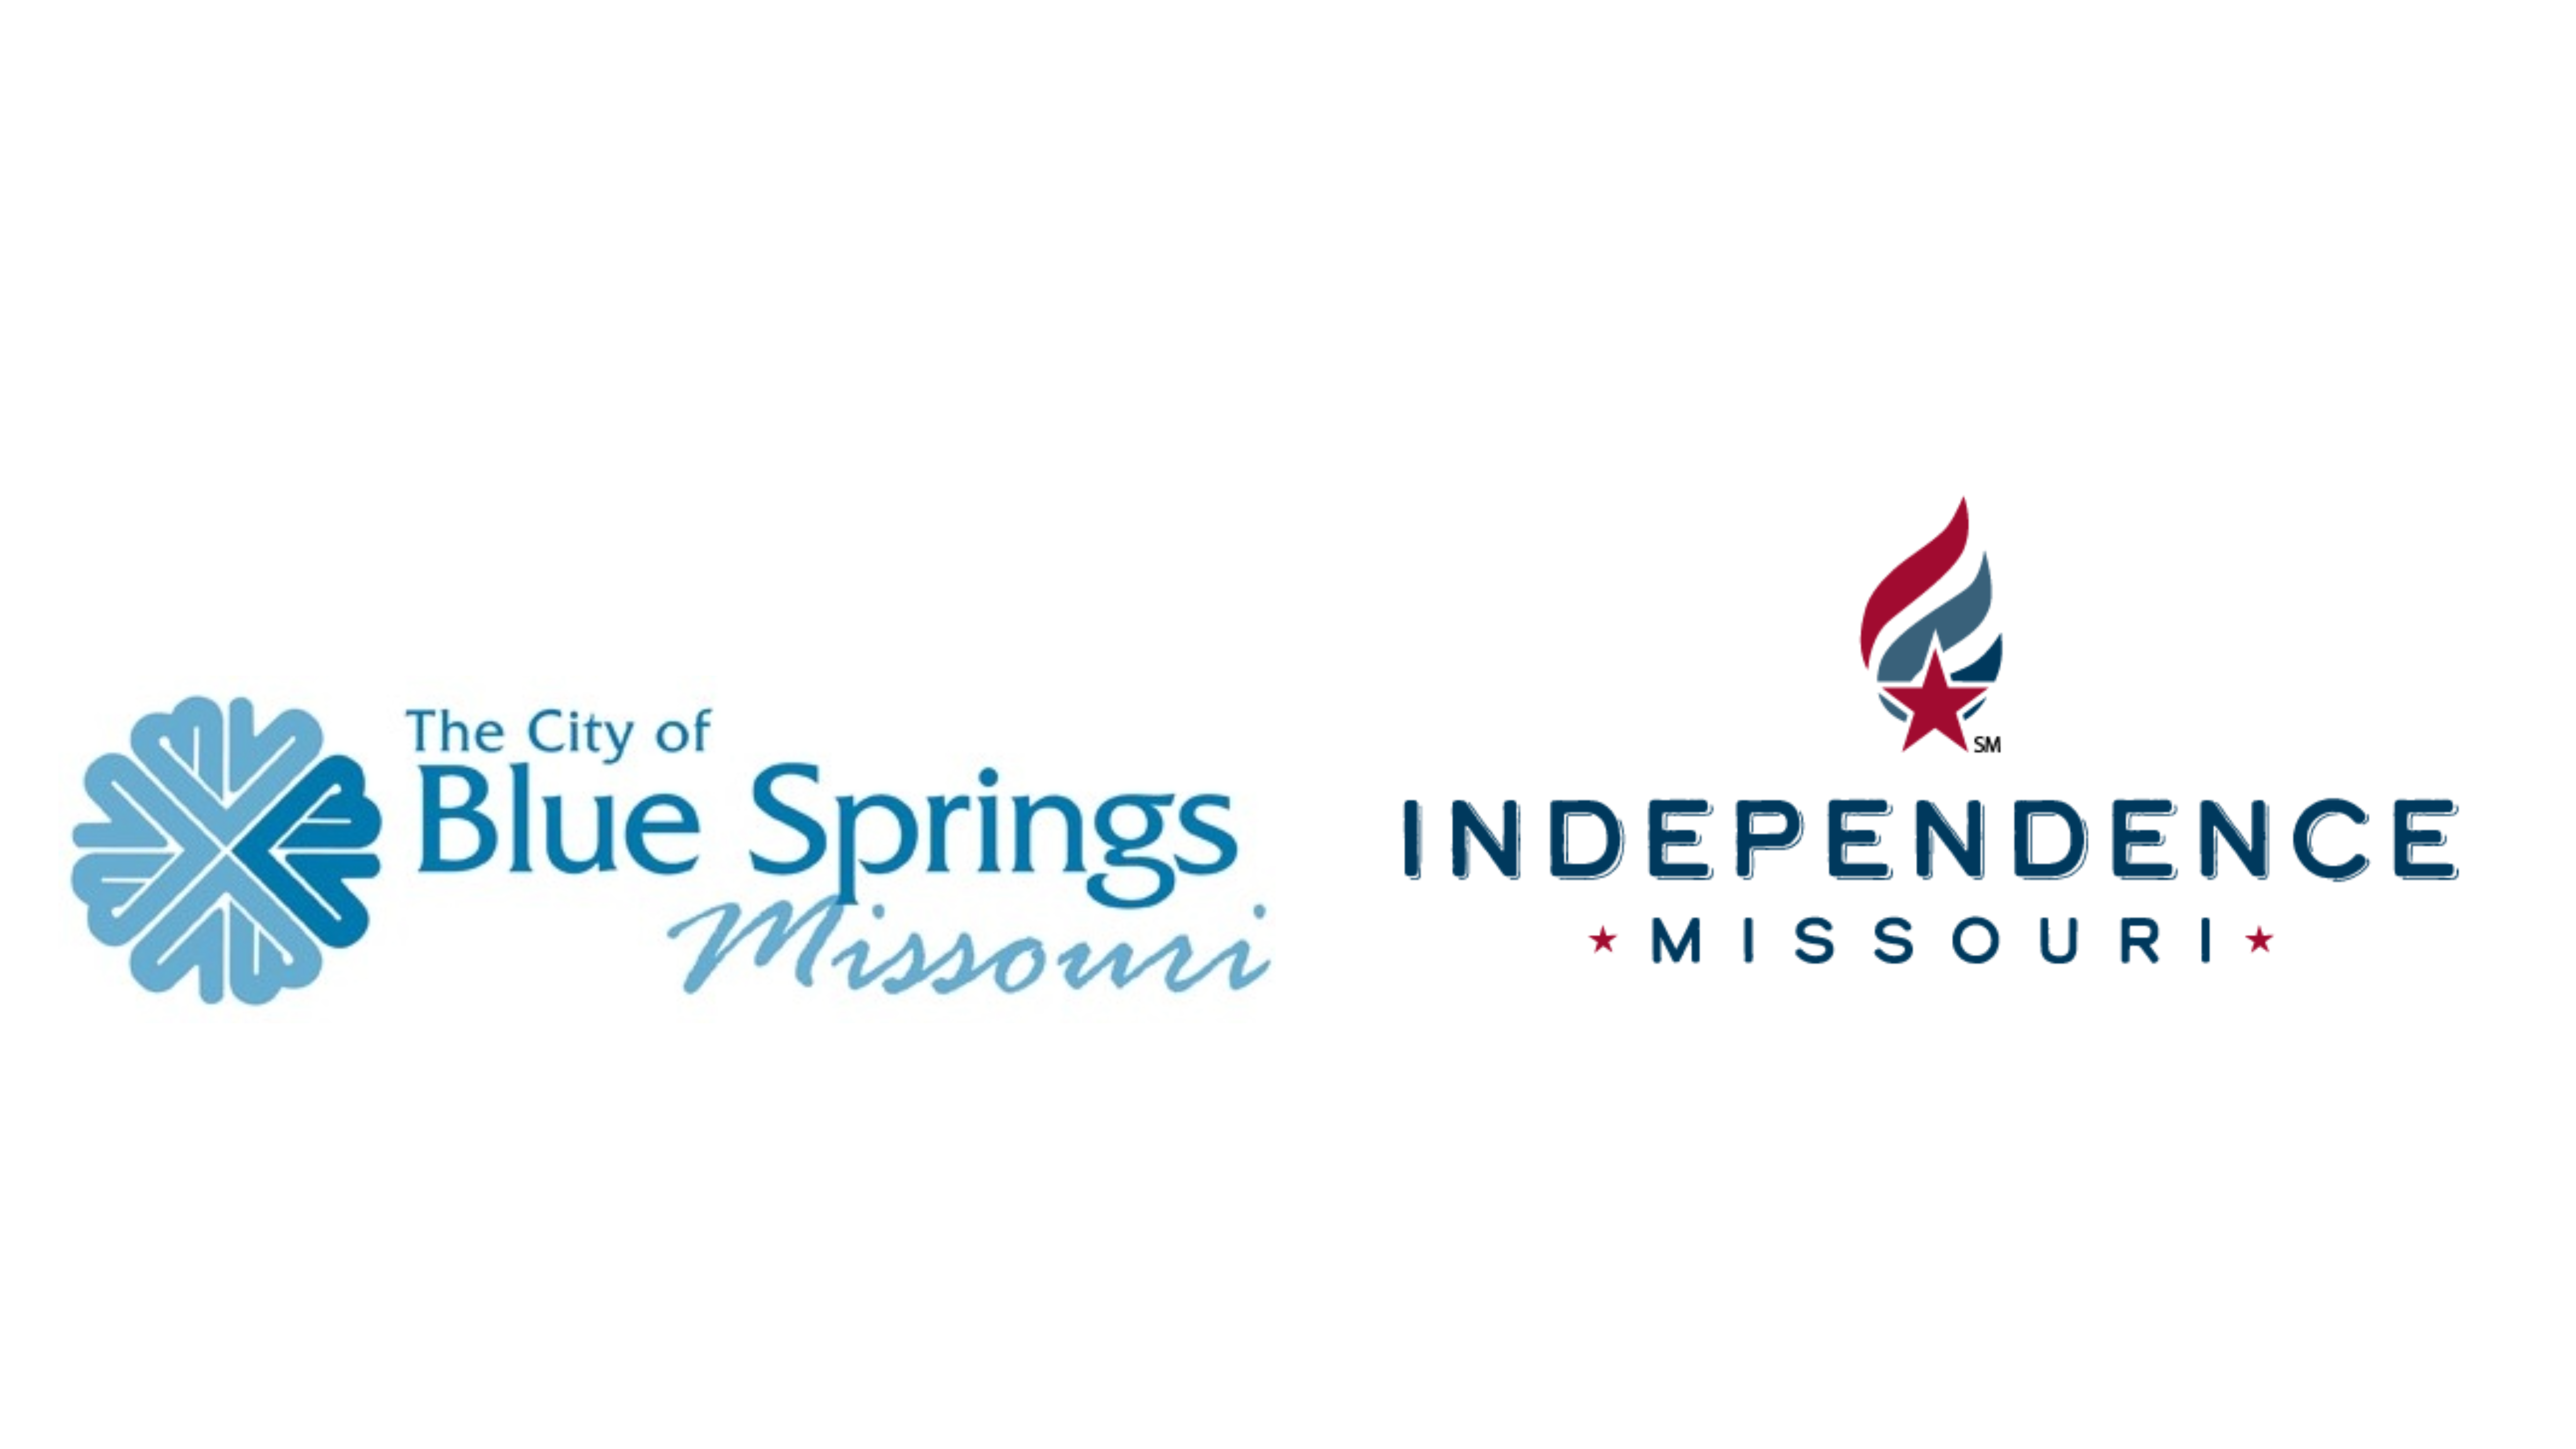 City of Blue Springs and City of Independence logos